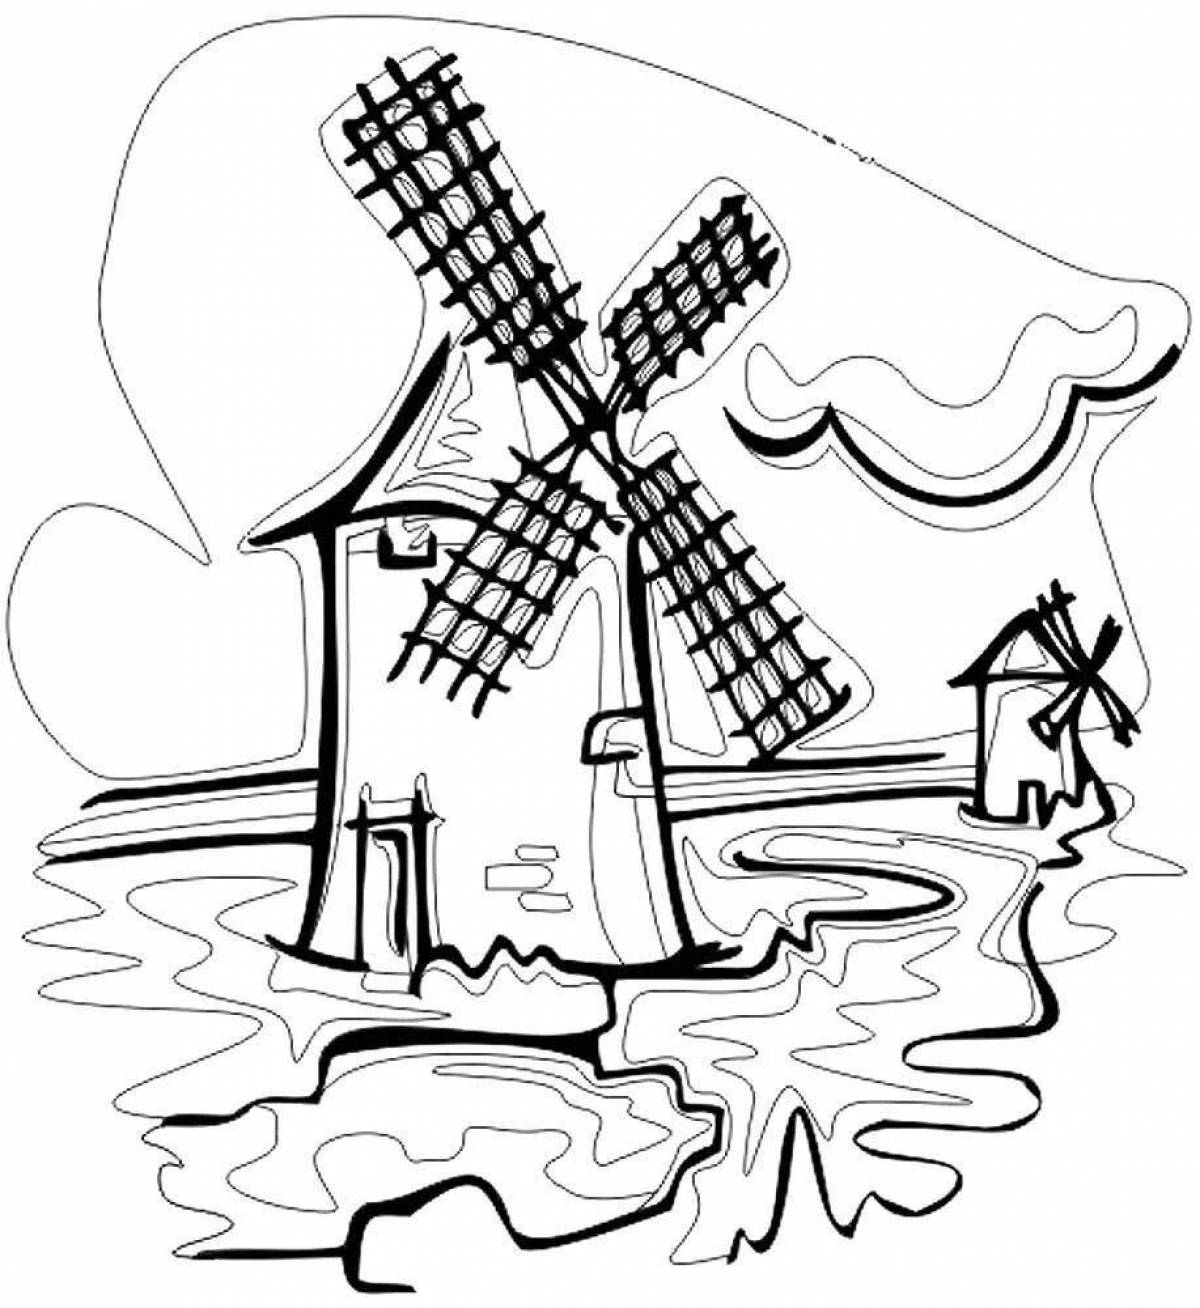 Coloured windmill for kids